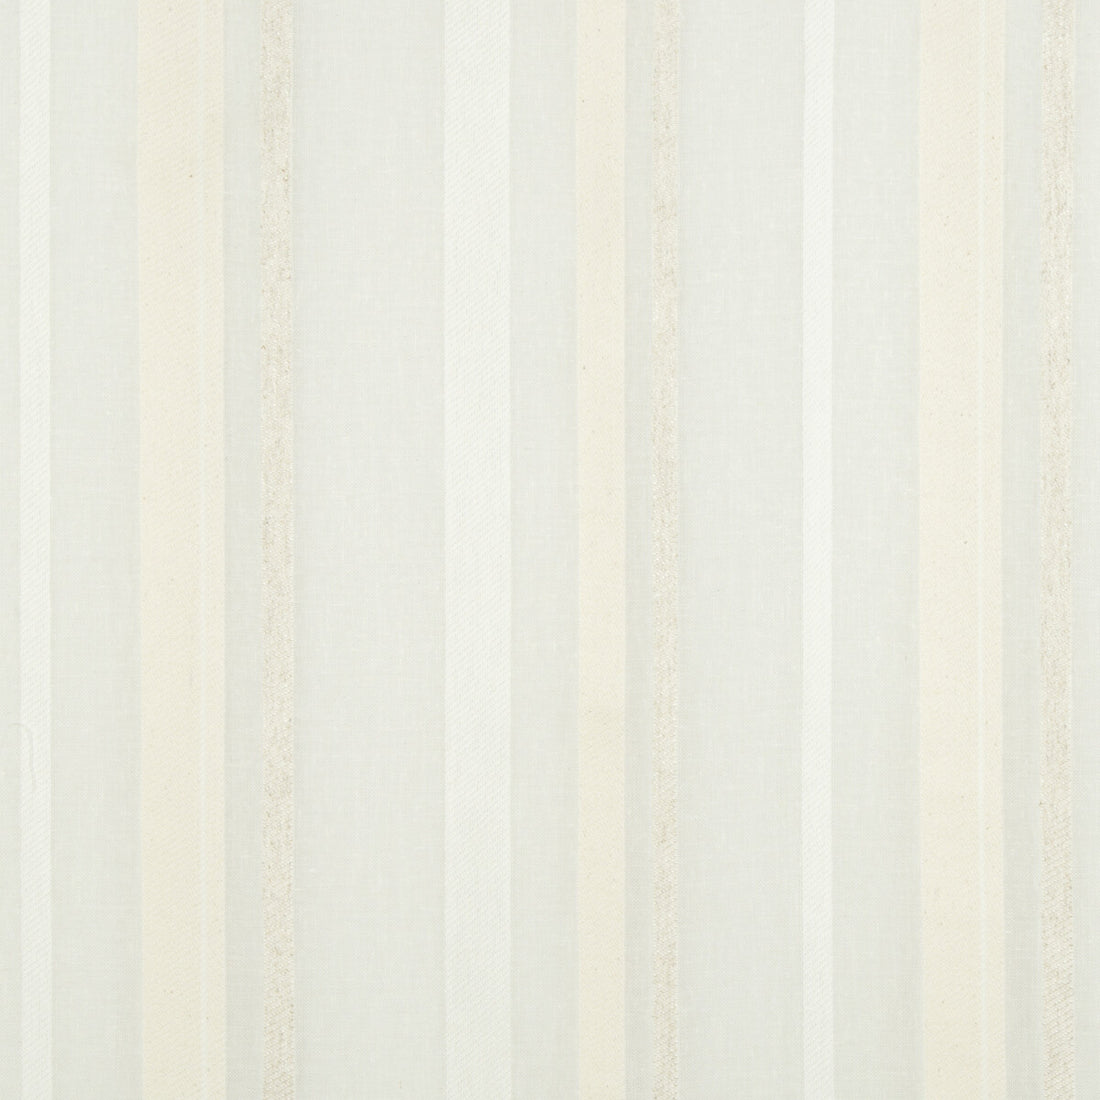 Sagres fabric in 1 color - pattern GDT5285.001.0 - by Gaston y Daniela in the Gaston Sheers collection